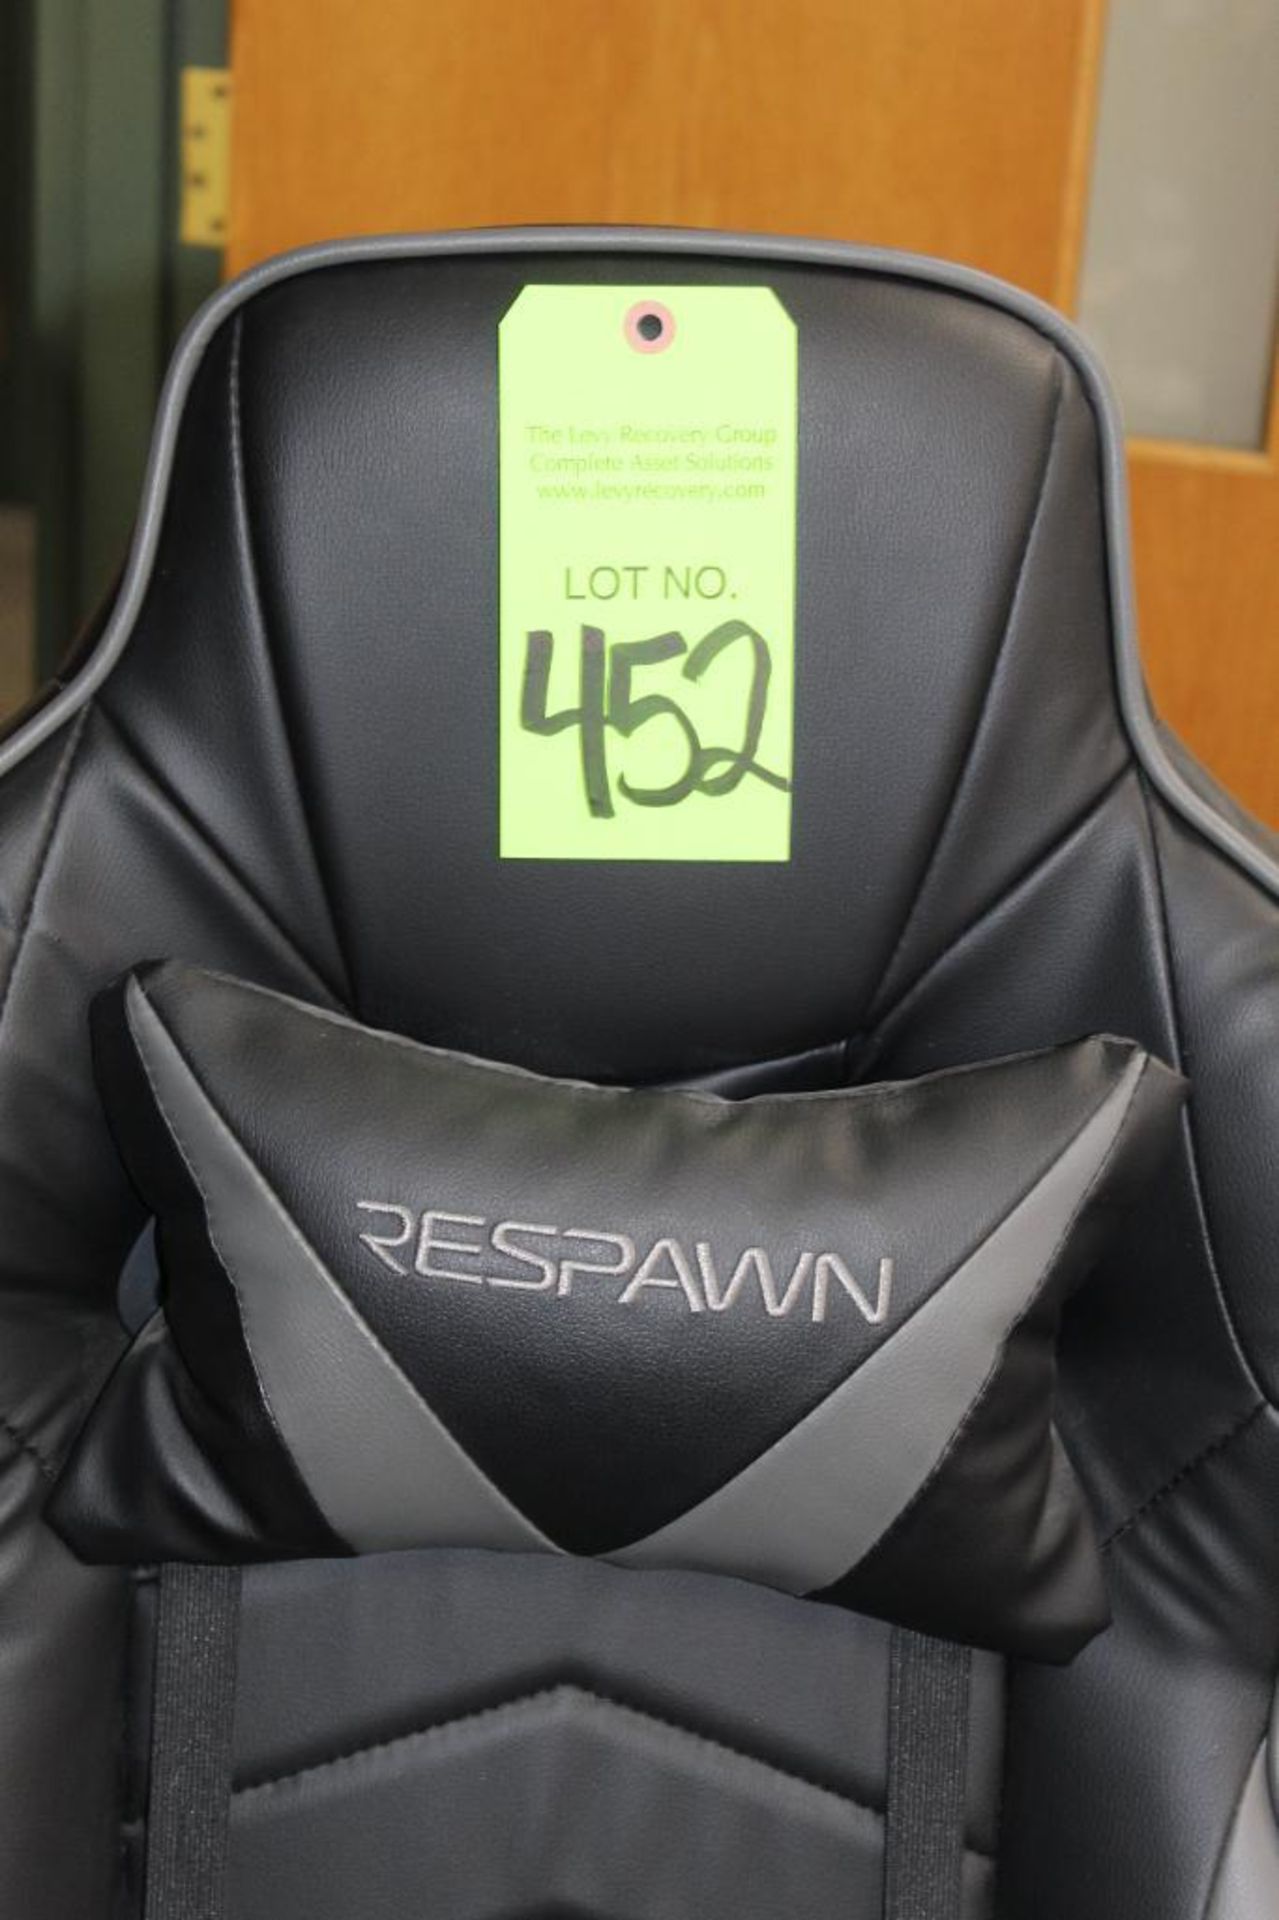 Respawn Office/Game Chair - Image 2 of 2